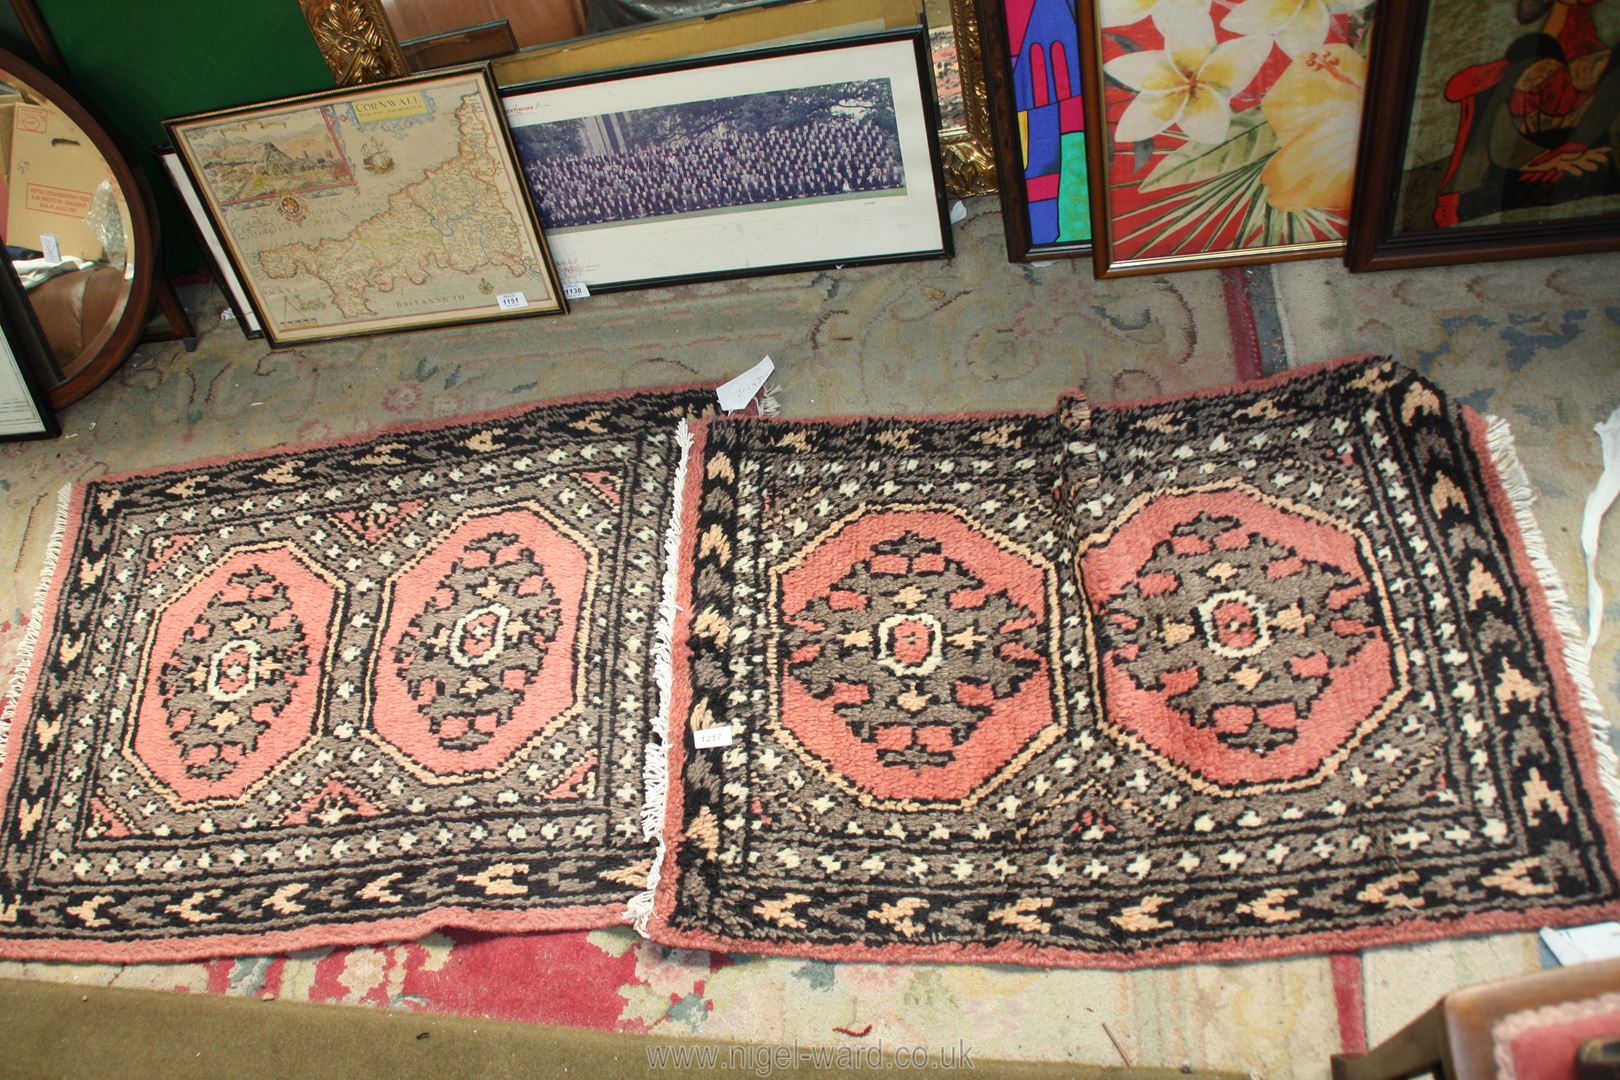 A pair of Afghan Uzbeck hand knotted rugs, 37" x 25" in brown/rust colour-way.